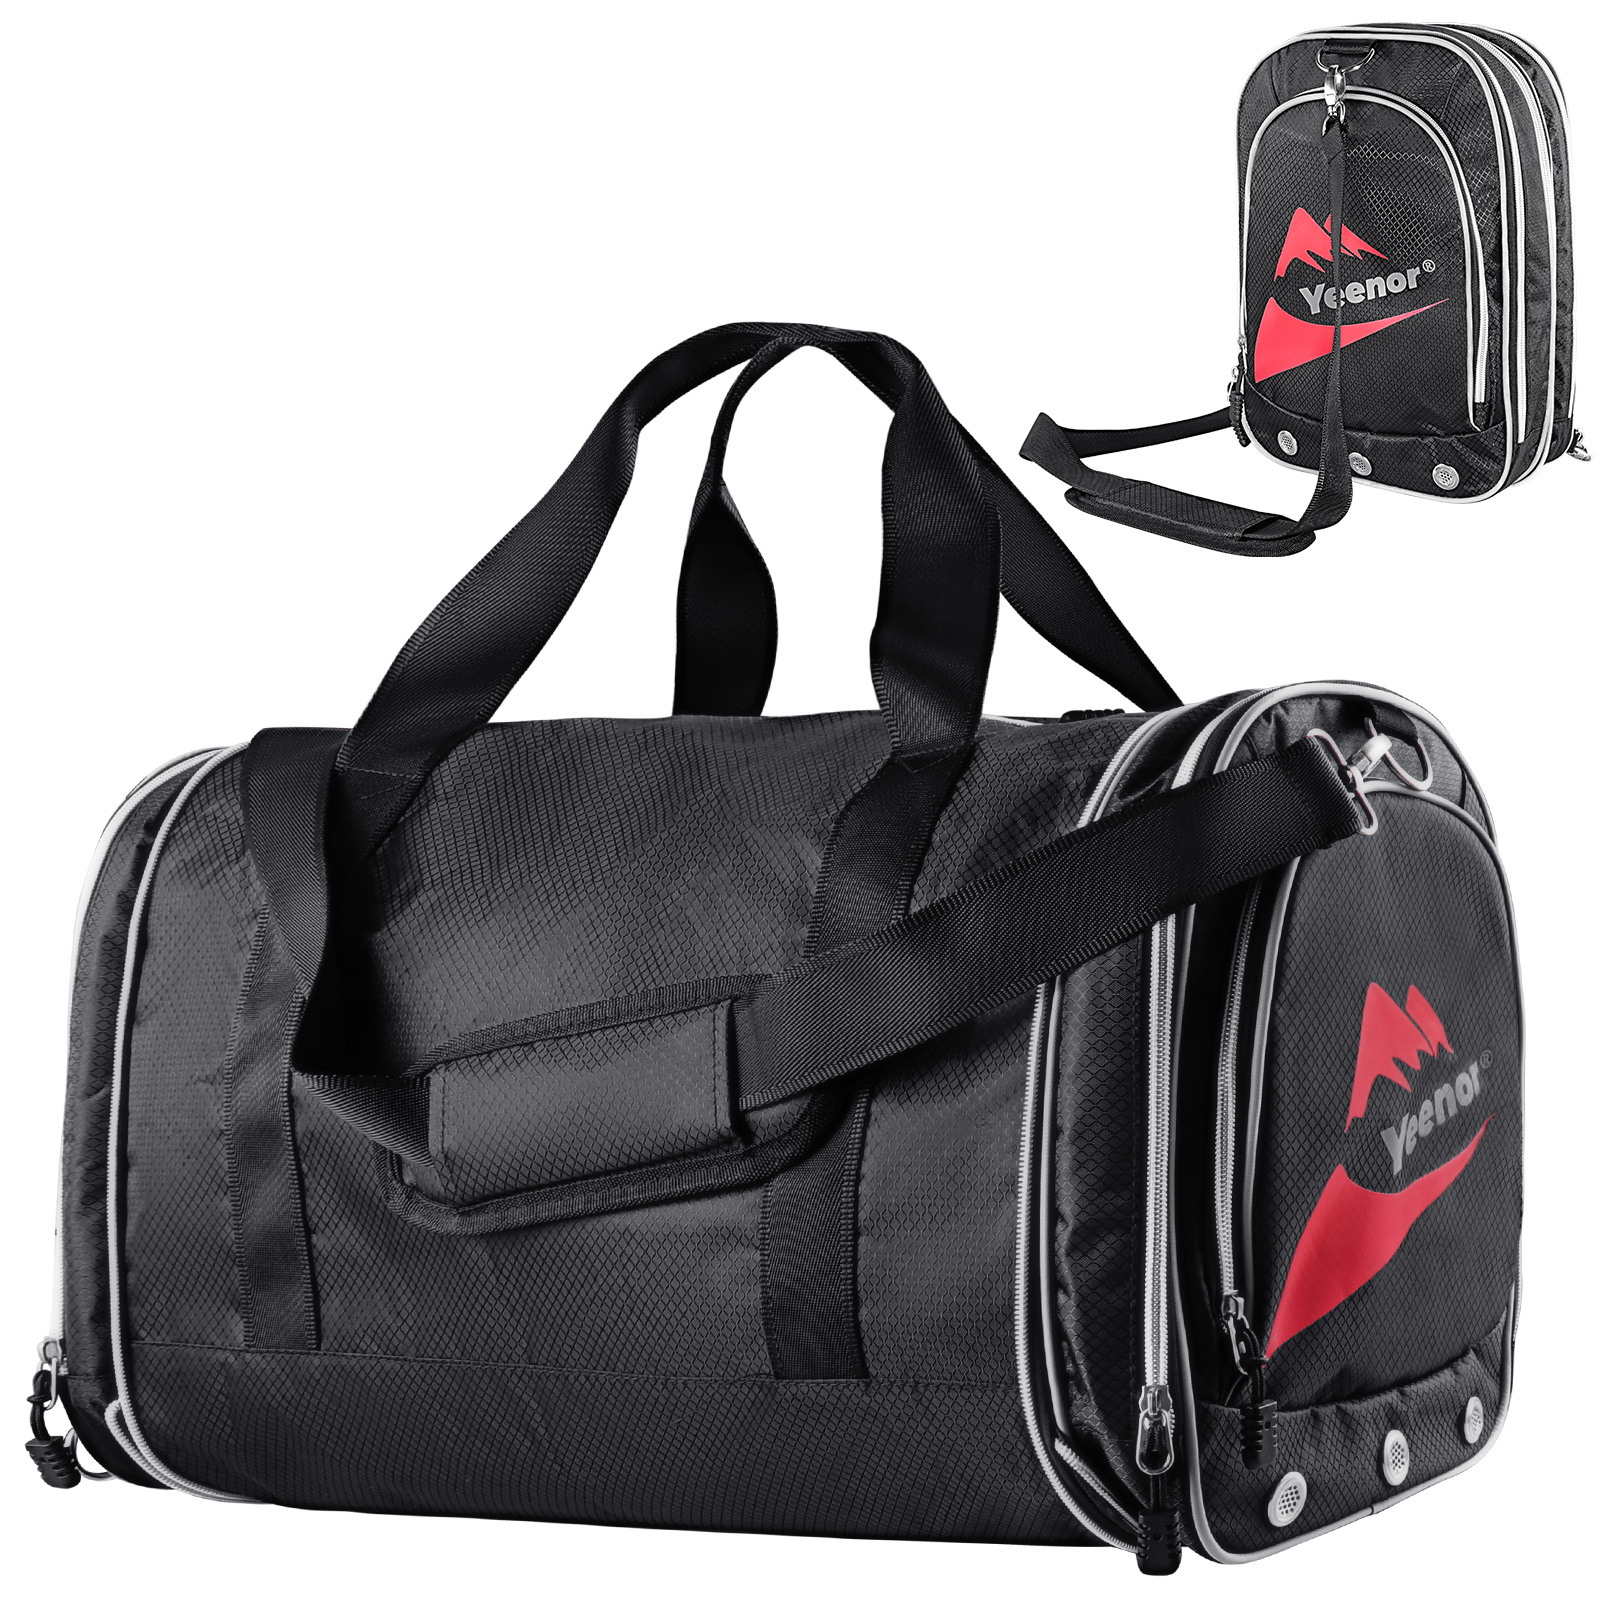 Gym Duffle Bag with Shoe Compartment 45L Foldable Waterproof Travel Bag Becomes a Shoulder Bag Gym Bag for Camping Sports Fitness Travel for Men Women